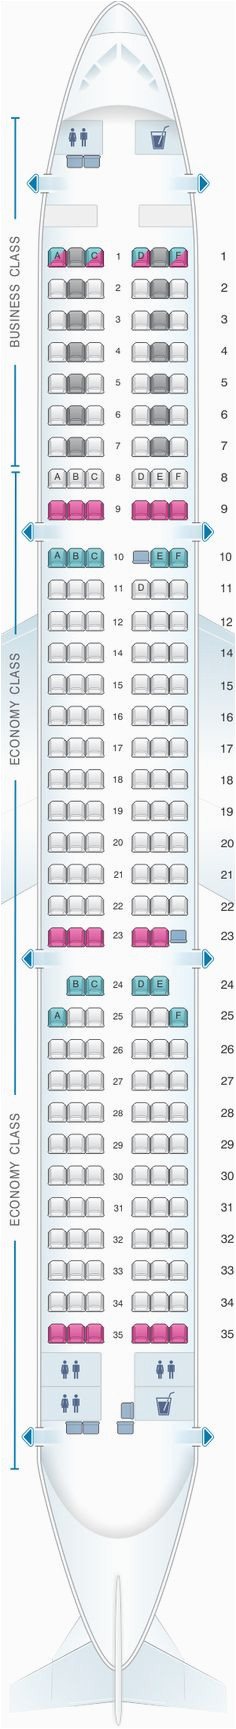 A321 Seating Chart